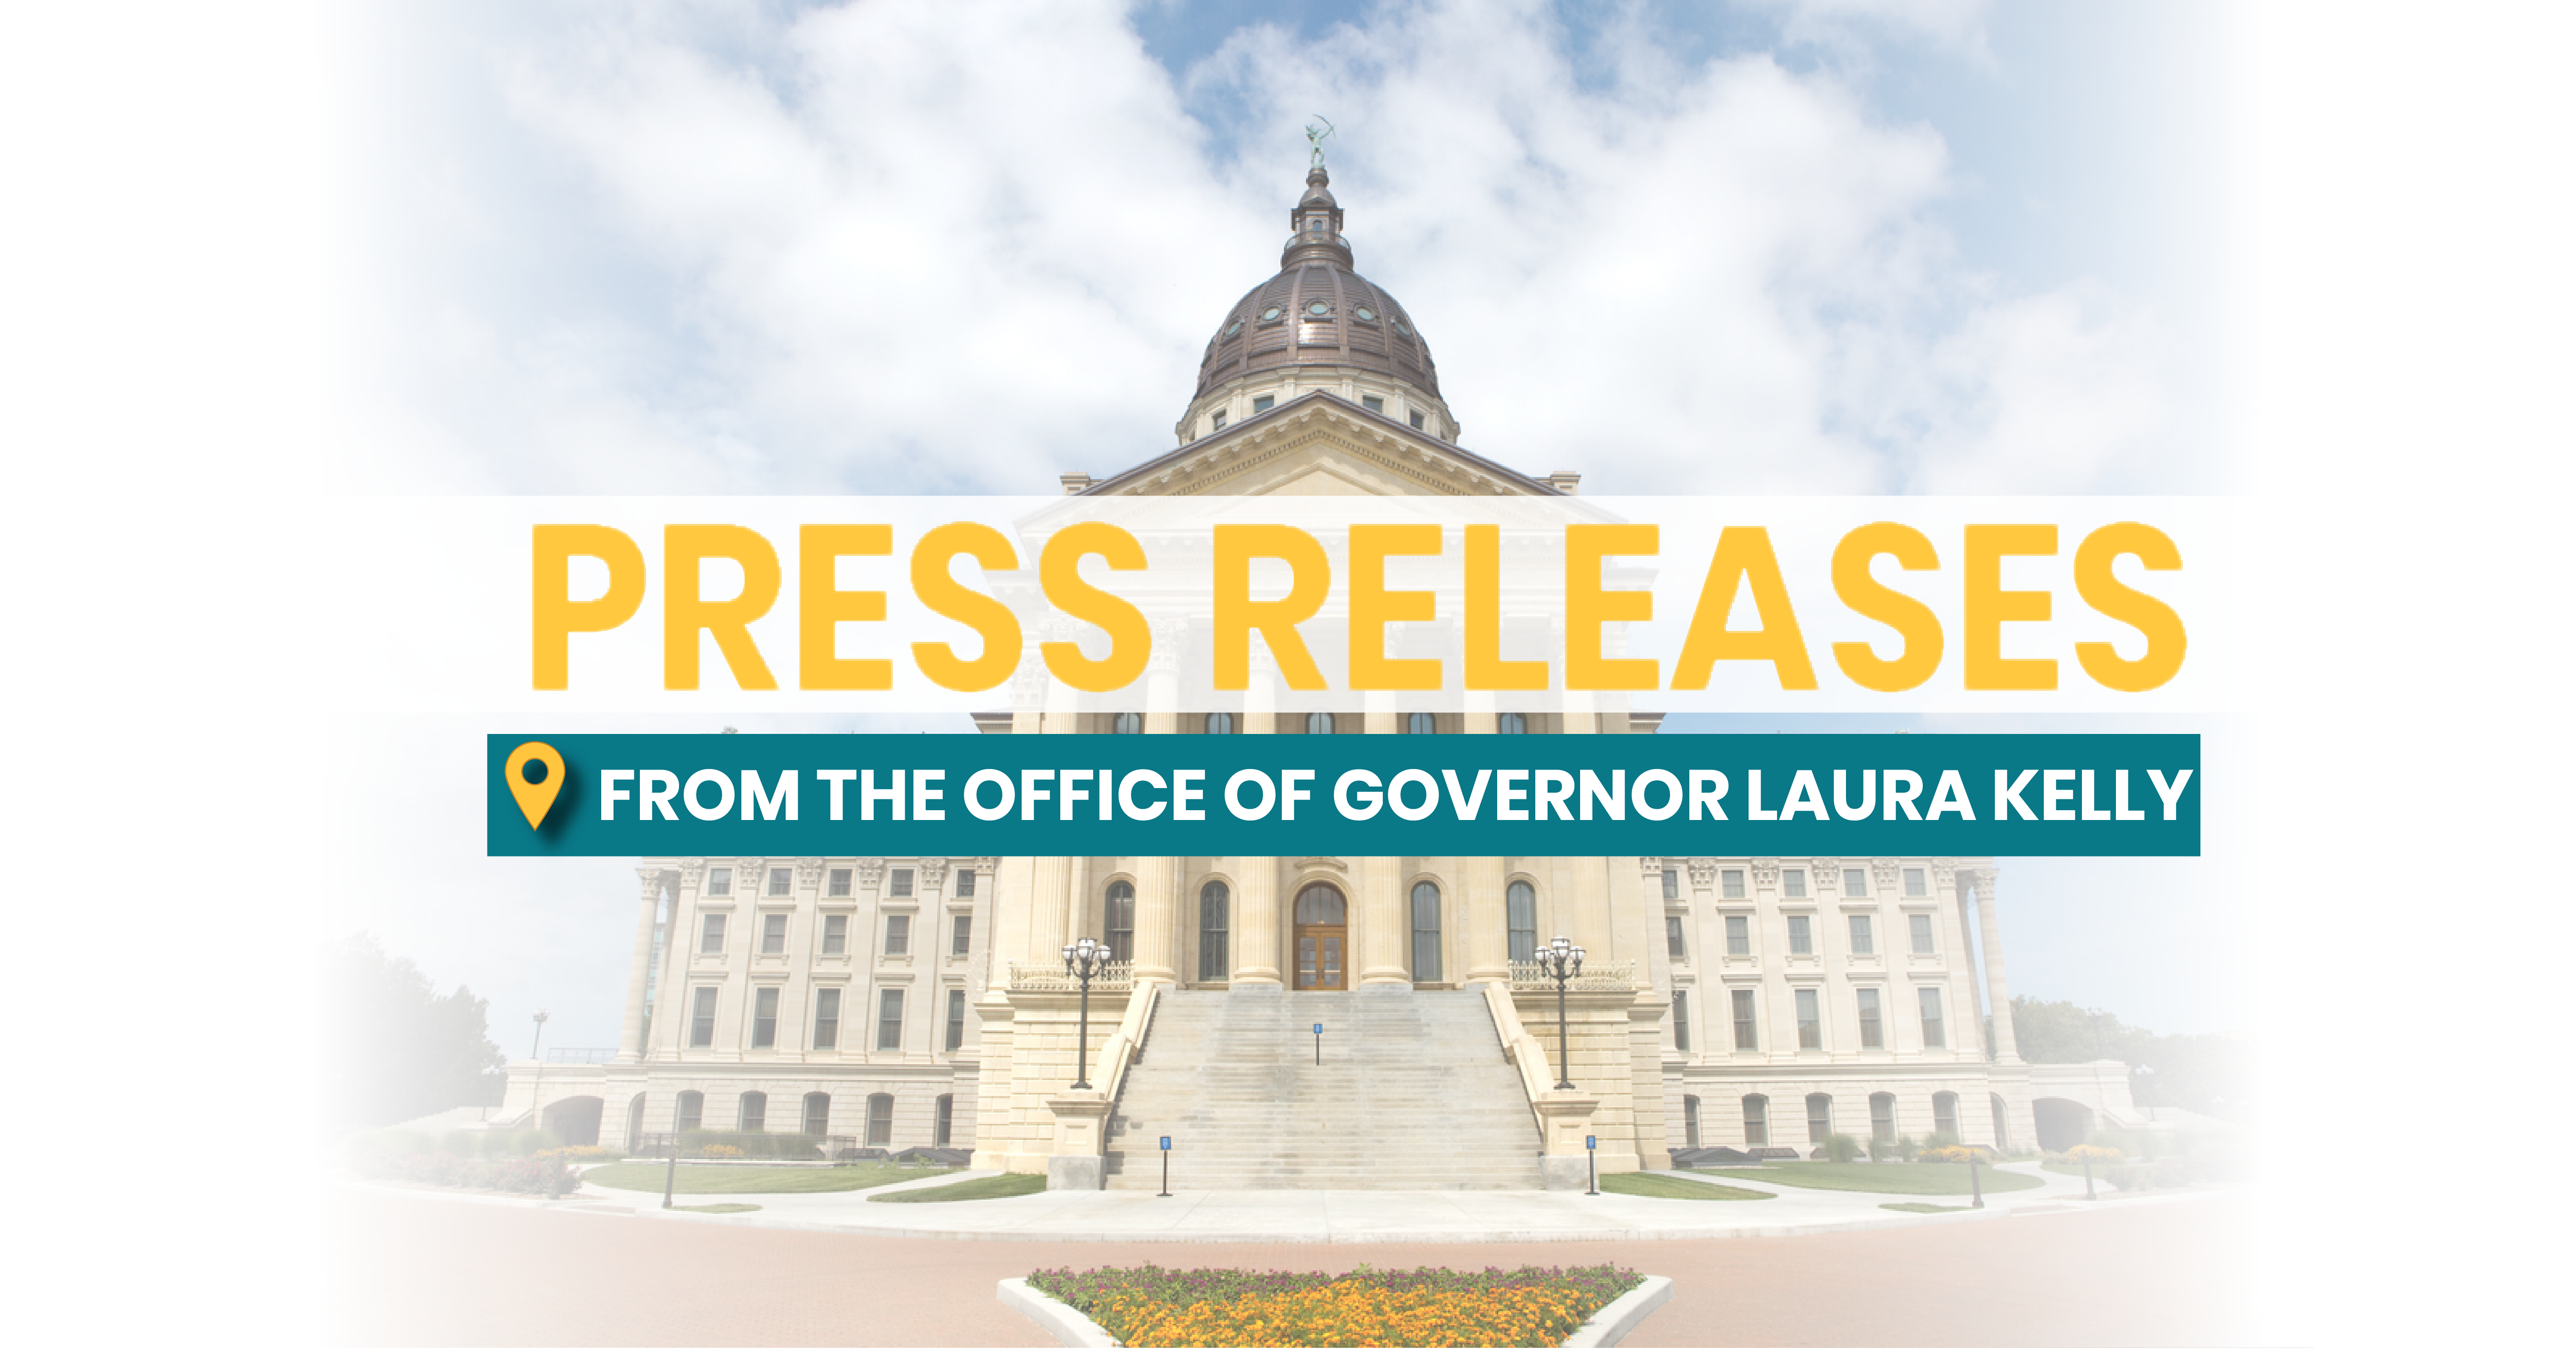 Governor’s statement regarding the Board of Regents decision